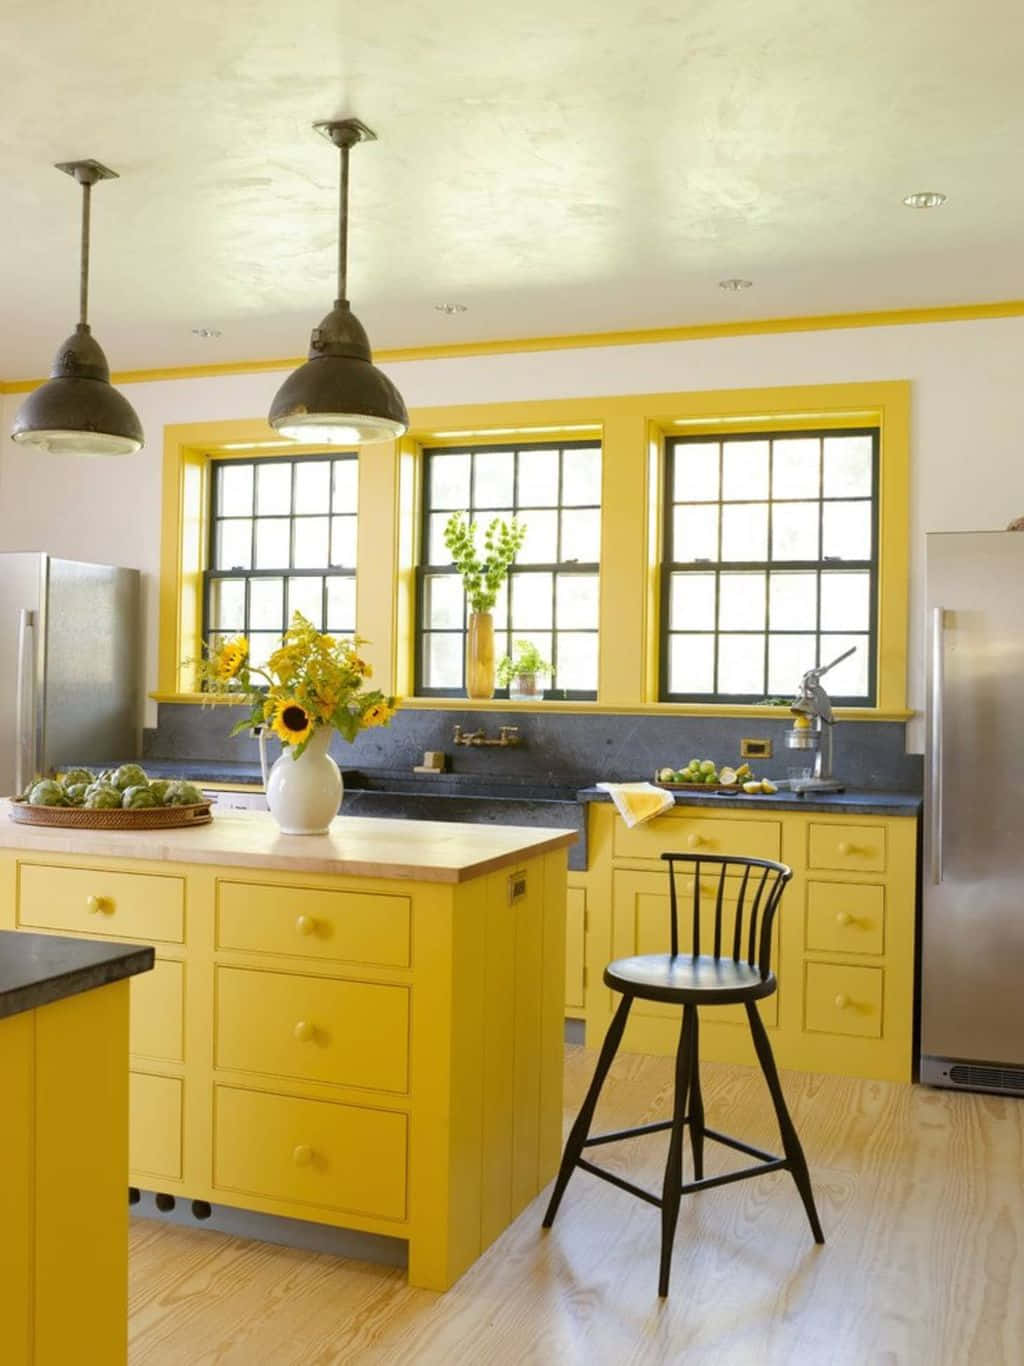 A Yellow Kitchen With Black Counter Tops And Wooden Floors